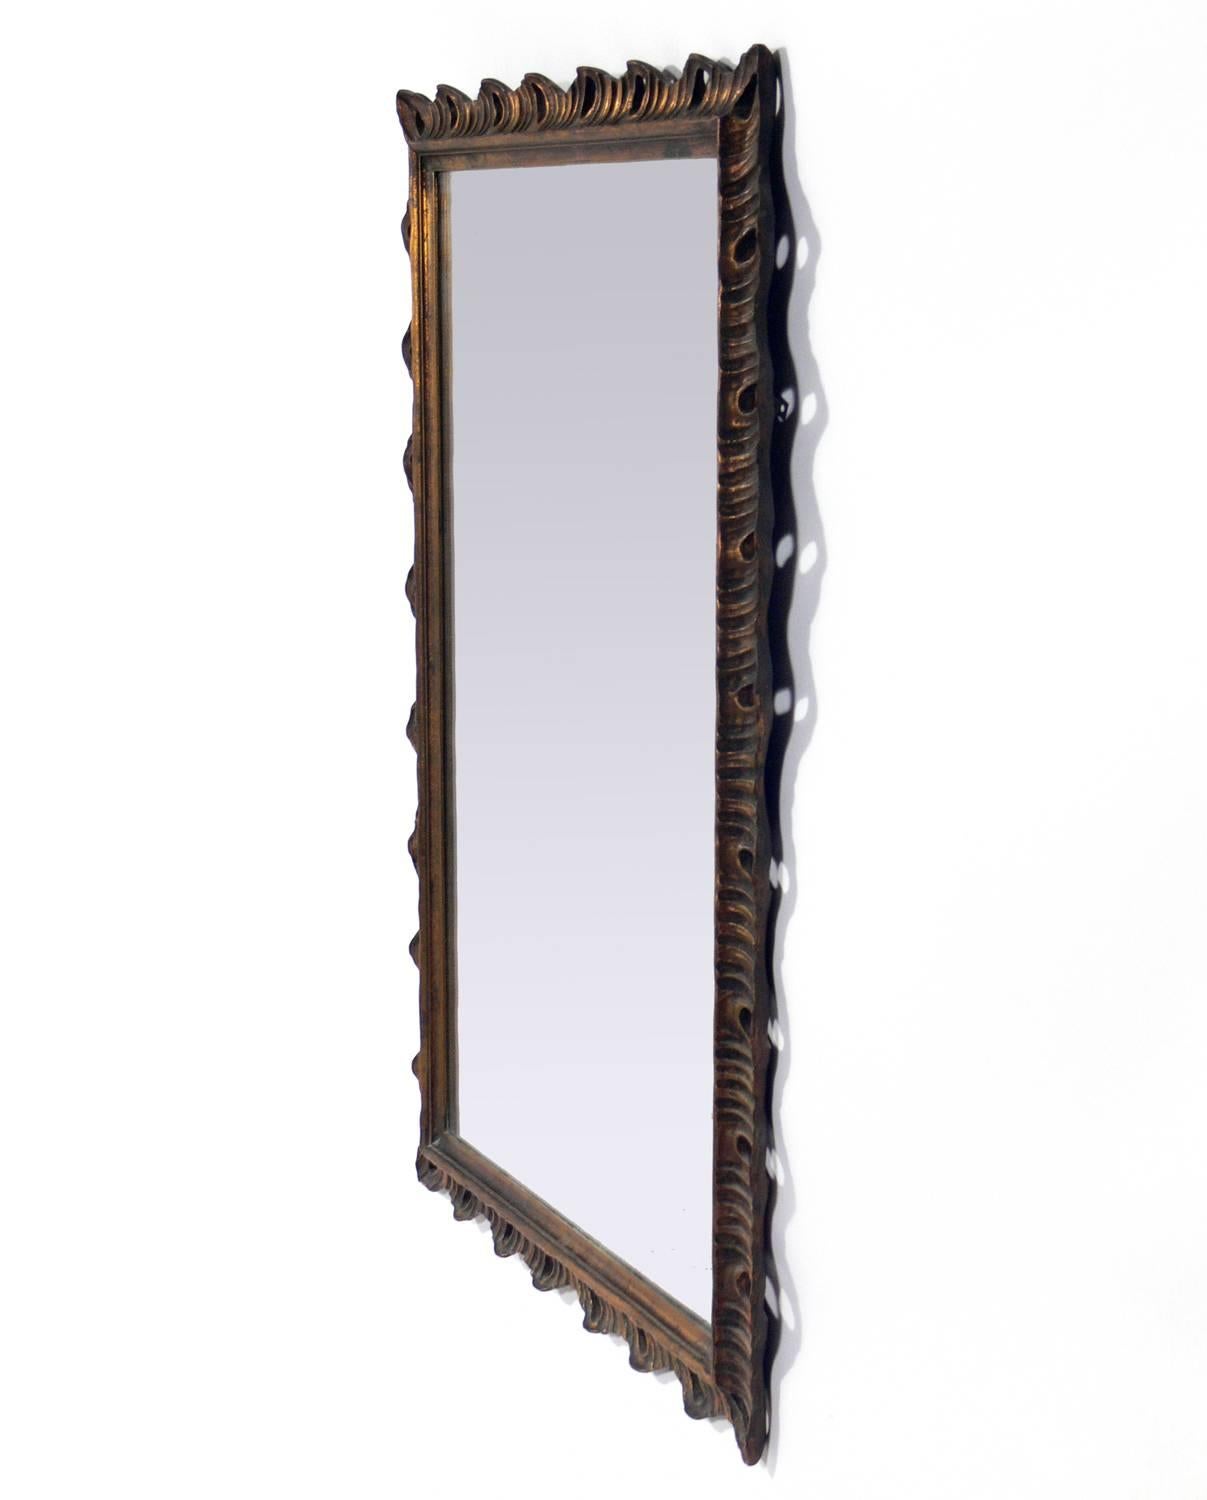 Gilt scalloped mirror, probably Italian, circa 1940s. Retains it's warm original patina to the gilt wood frame and the mirror.